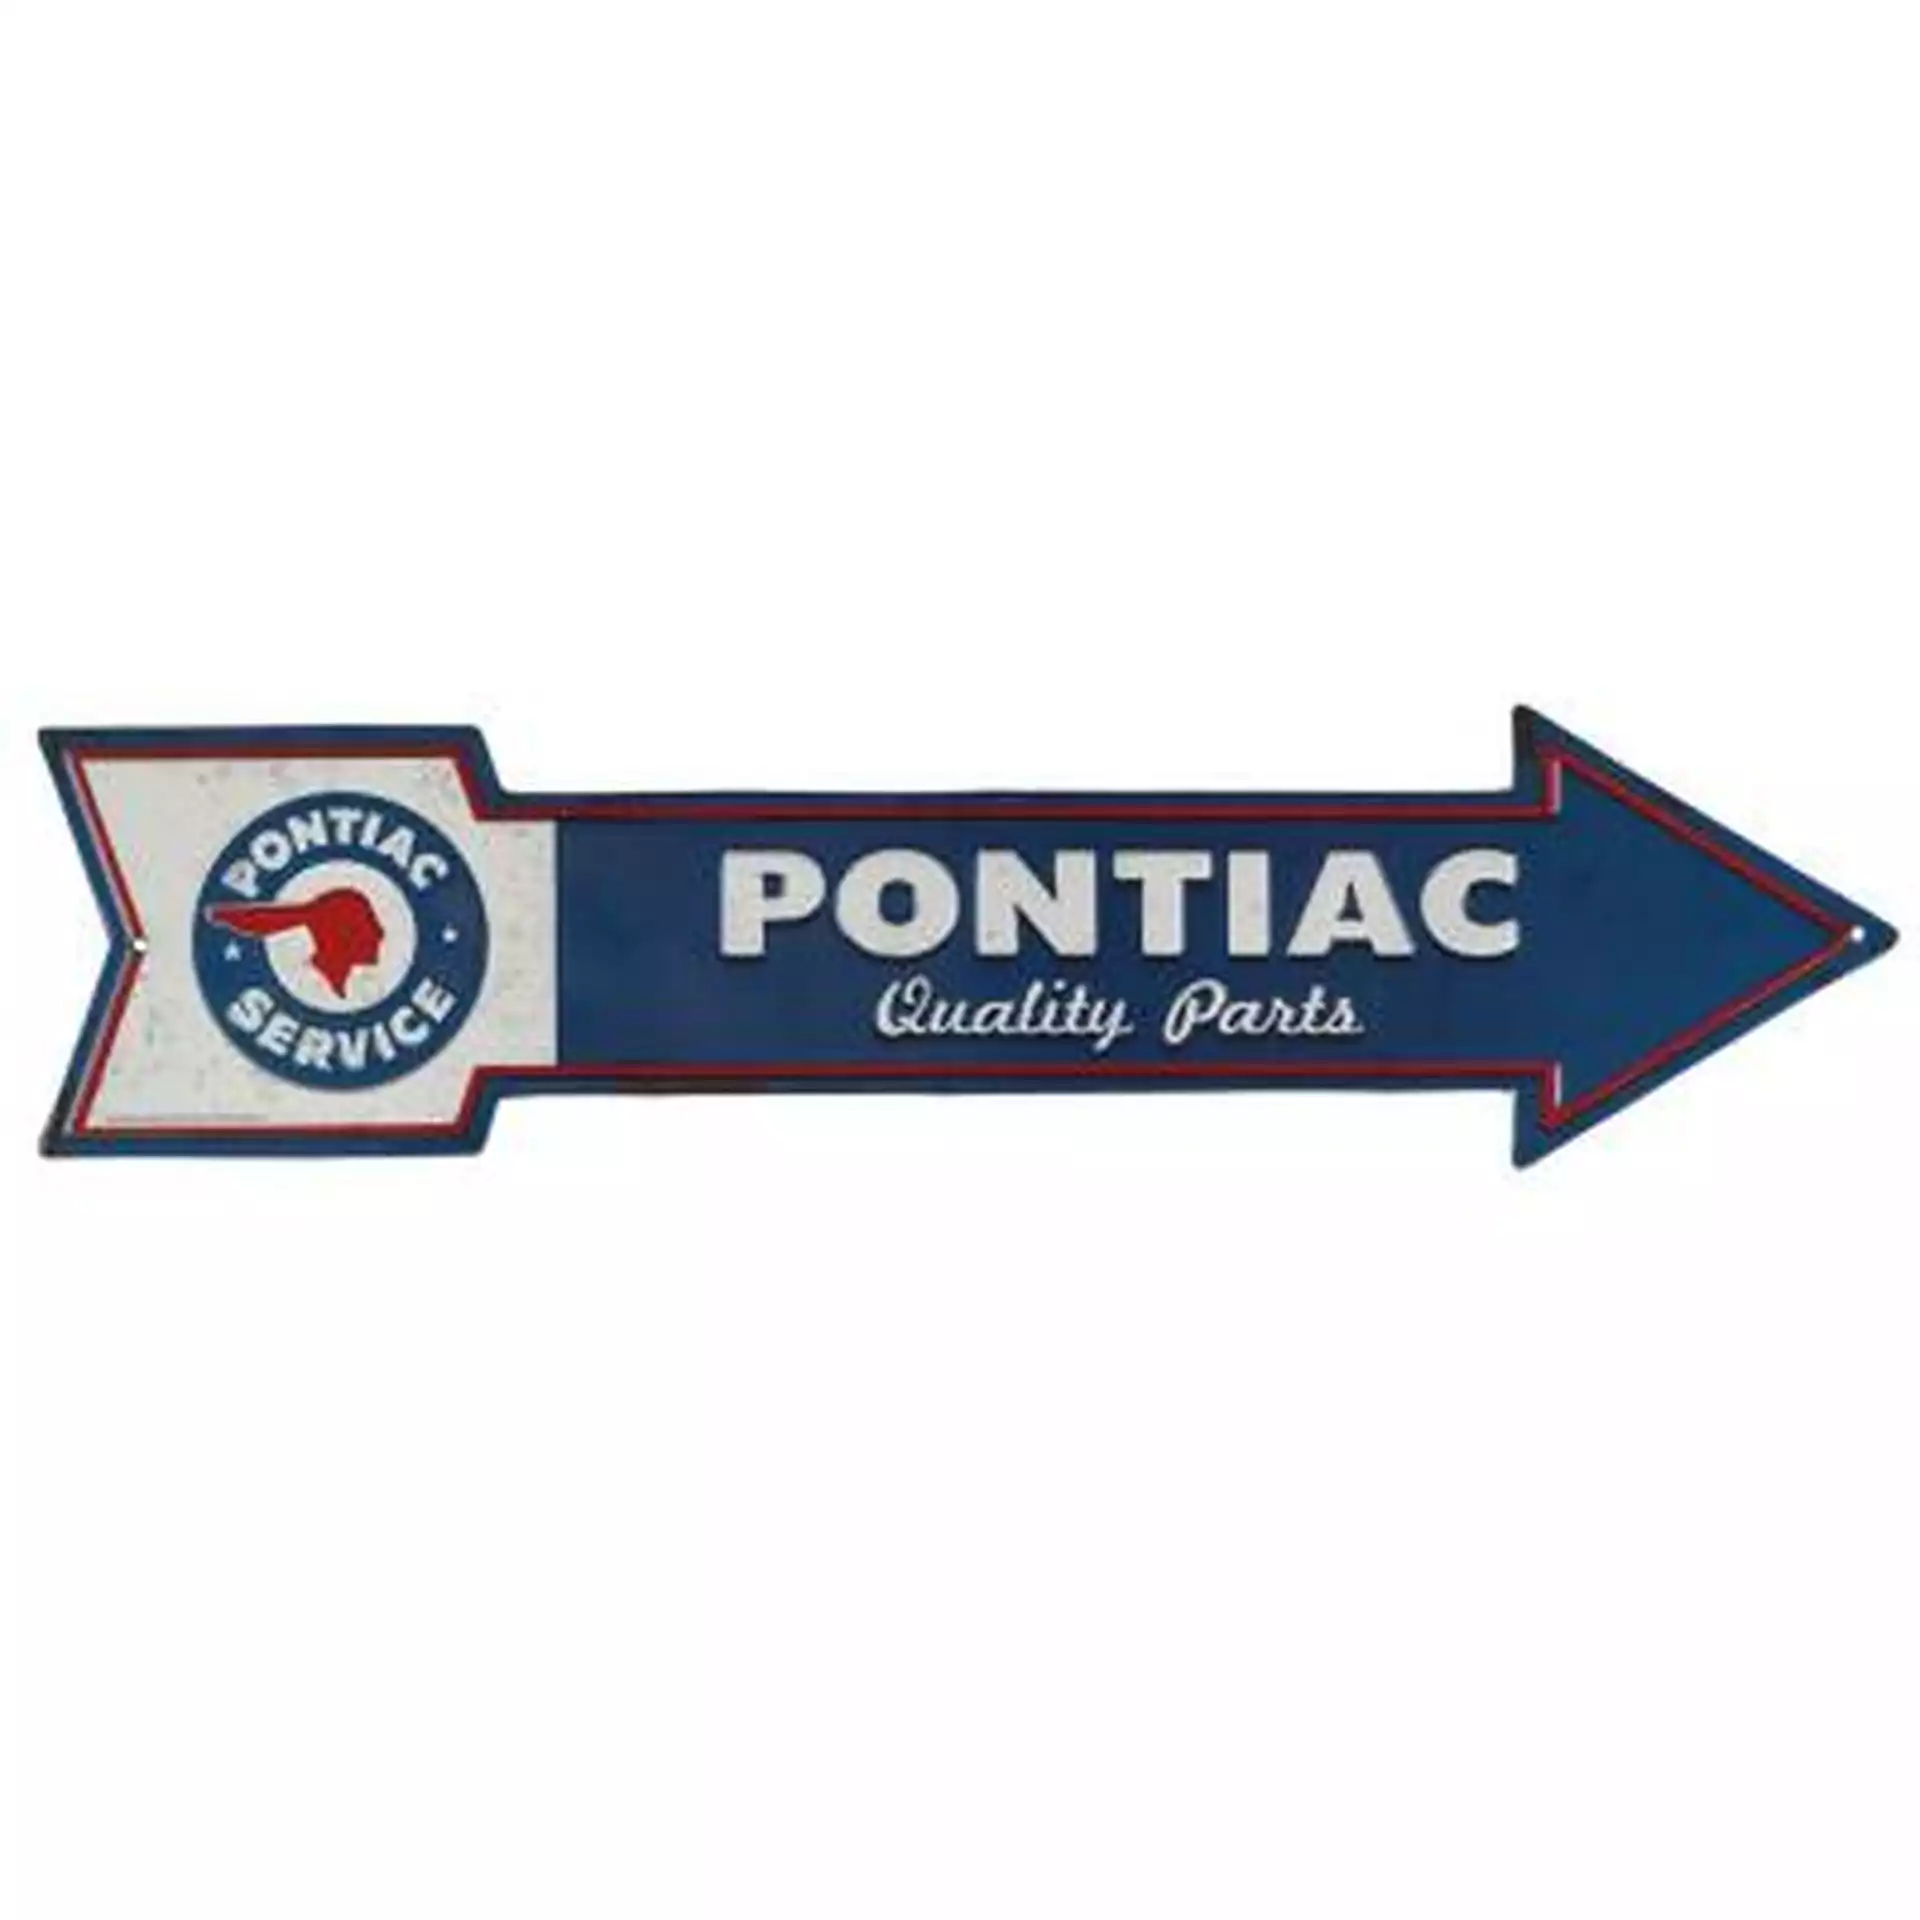 Open Road Brands Pontiac Quality Parts Embossed Tin Sign, Blue/White